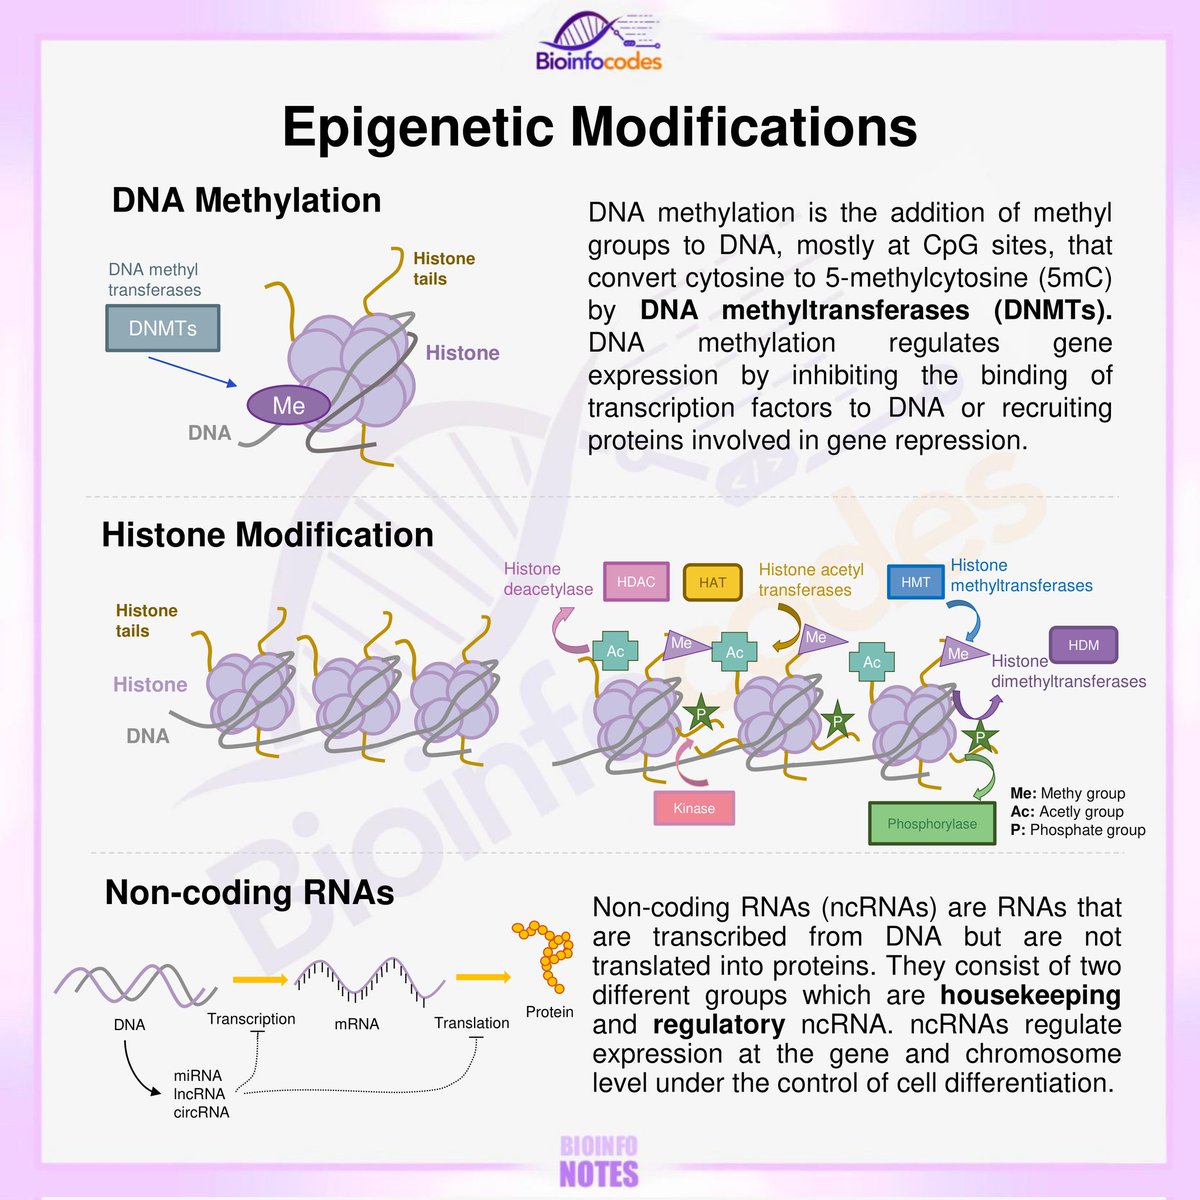 Epigenetic modifications are chemical changes to DNA or associated proteins that can control gene expression without altering the underlying DNA sequence. They influence how genes are turned on or off and play a critical role in development and disease. New #bioinfonotes about…